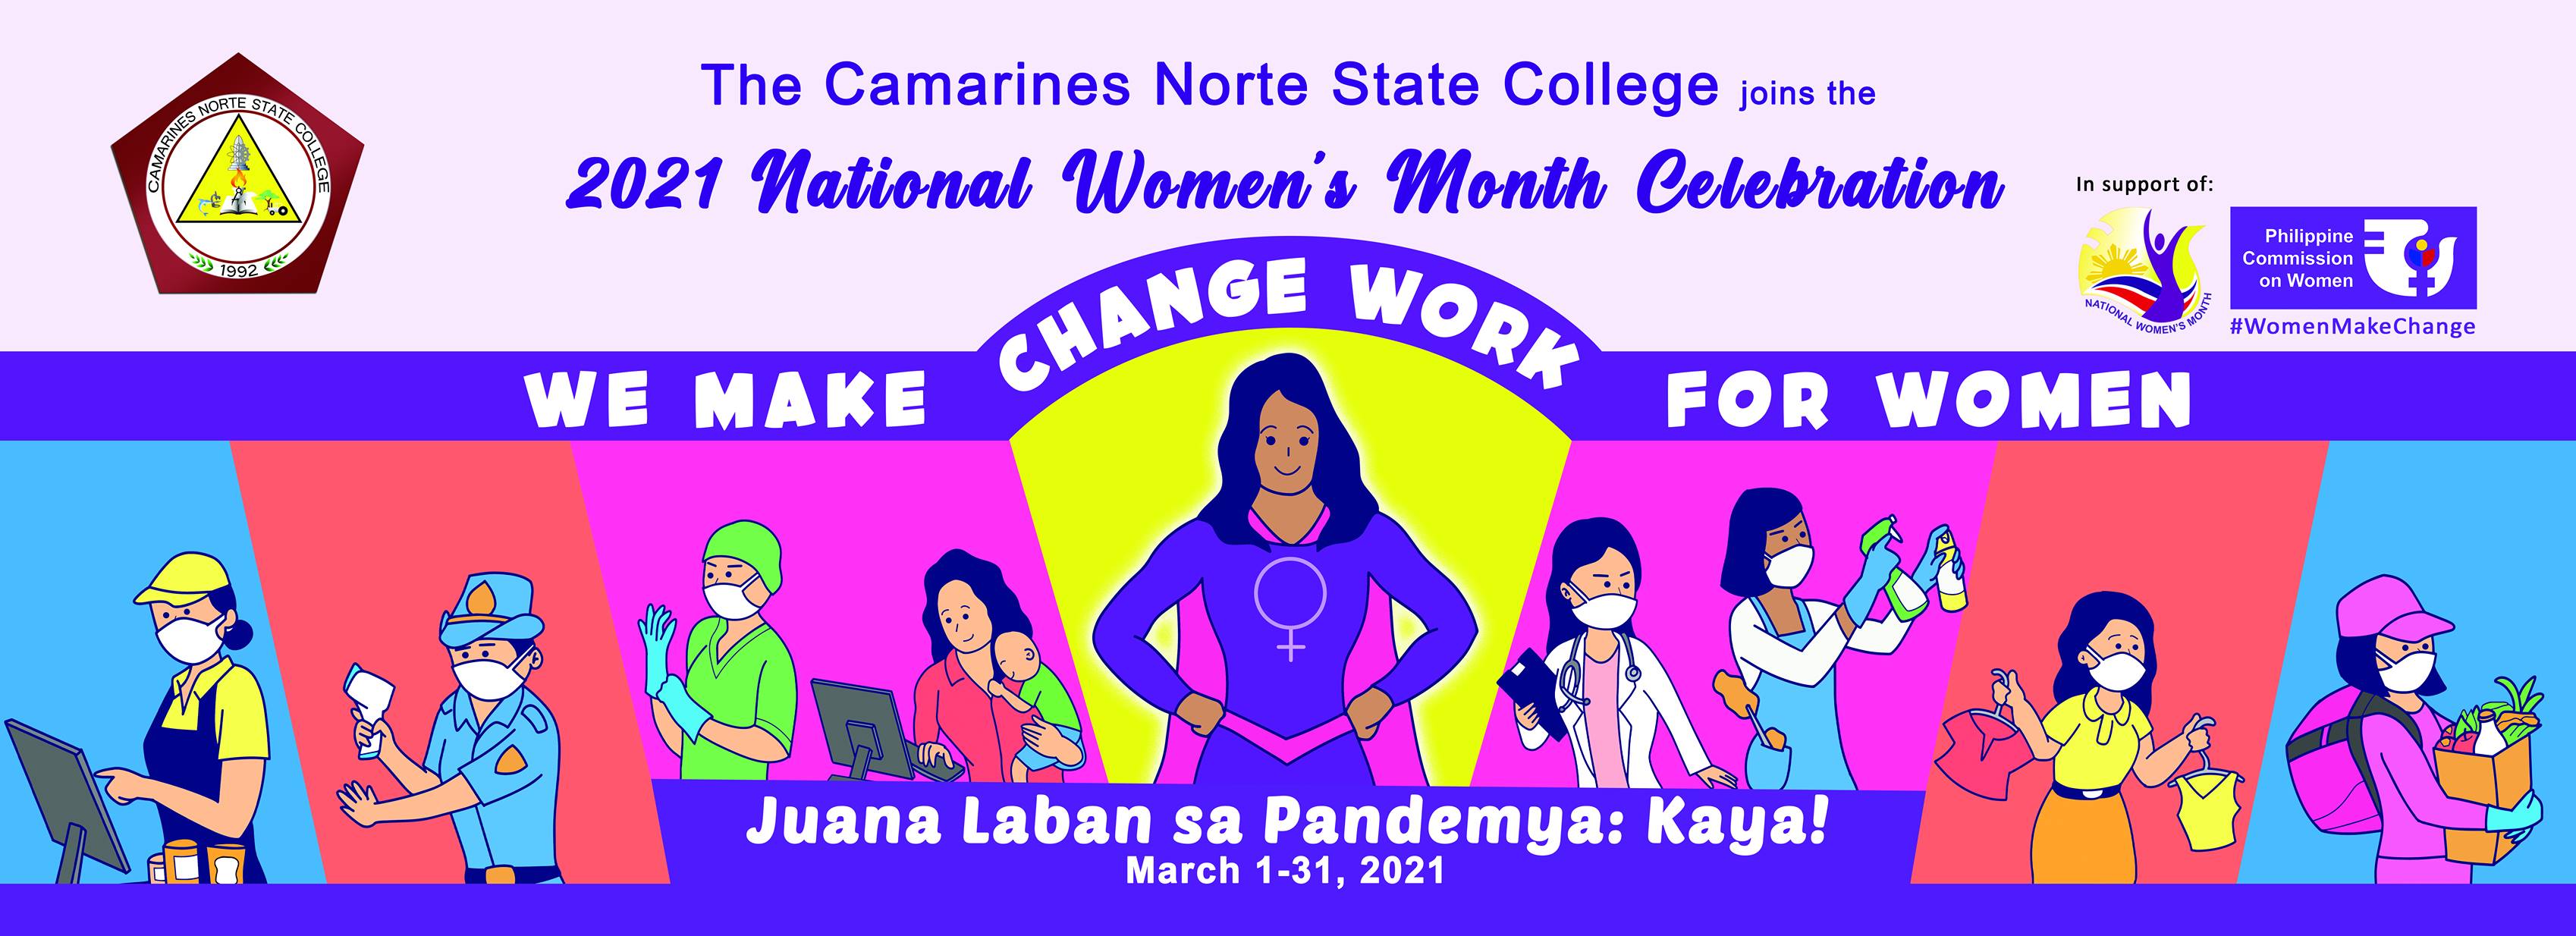 CNSC supports 2021 National Women’s Month Celebration